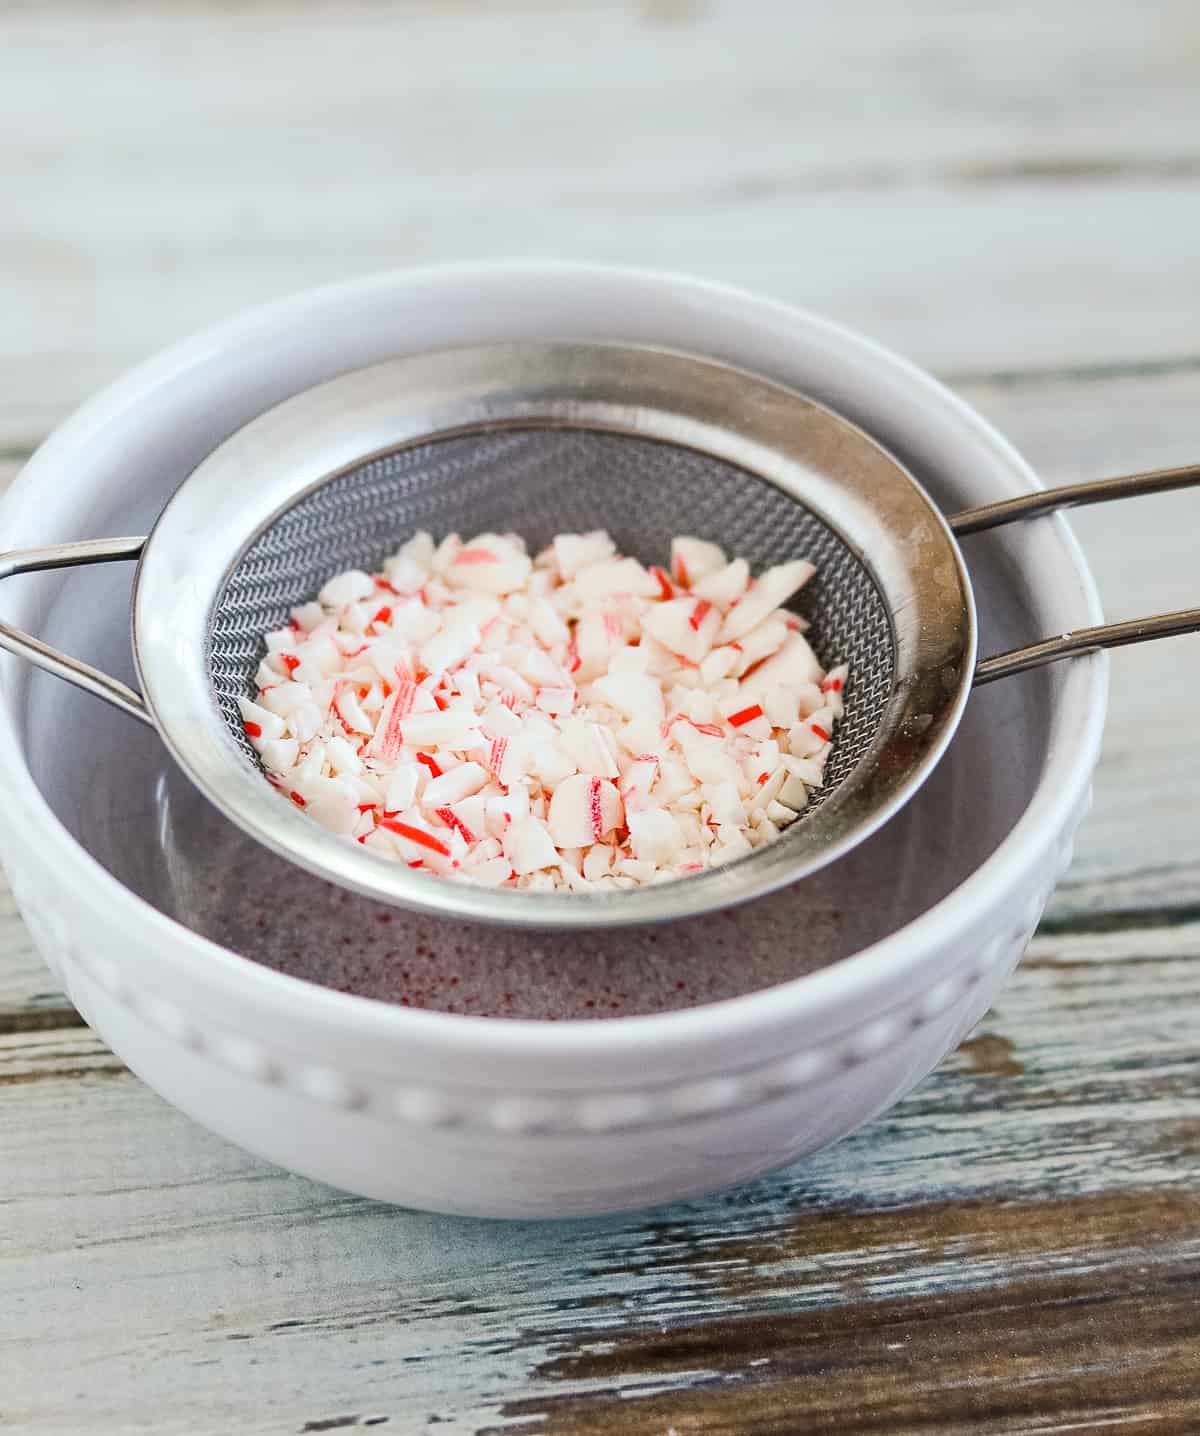 crushed candy canes in a strainer